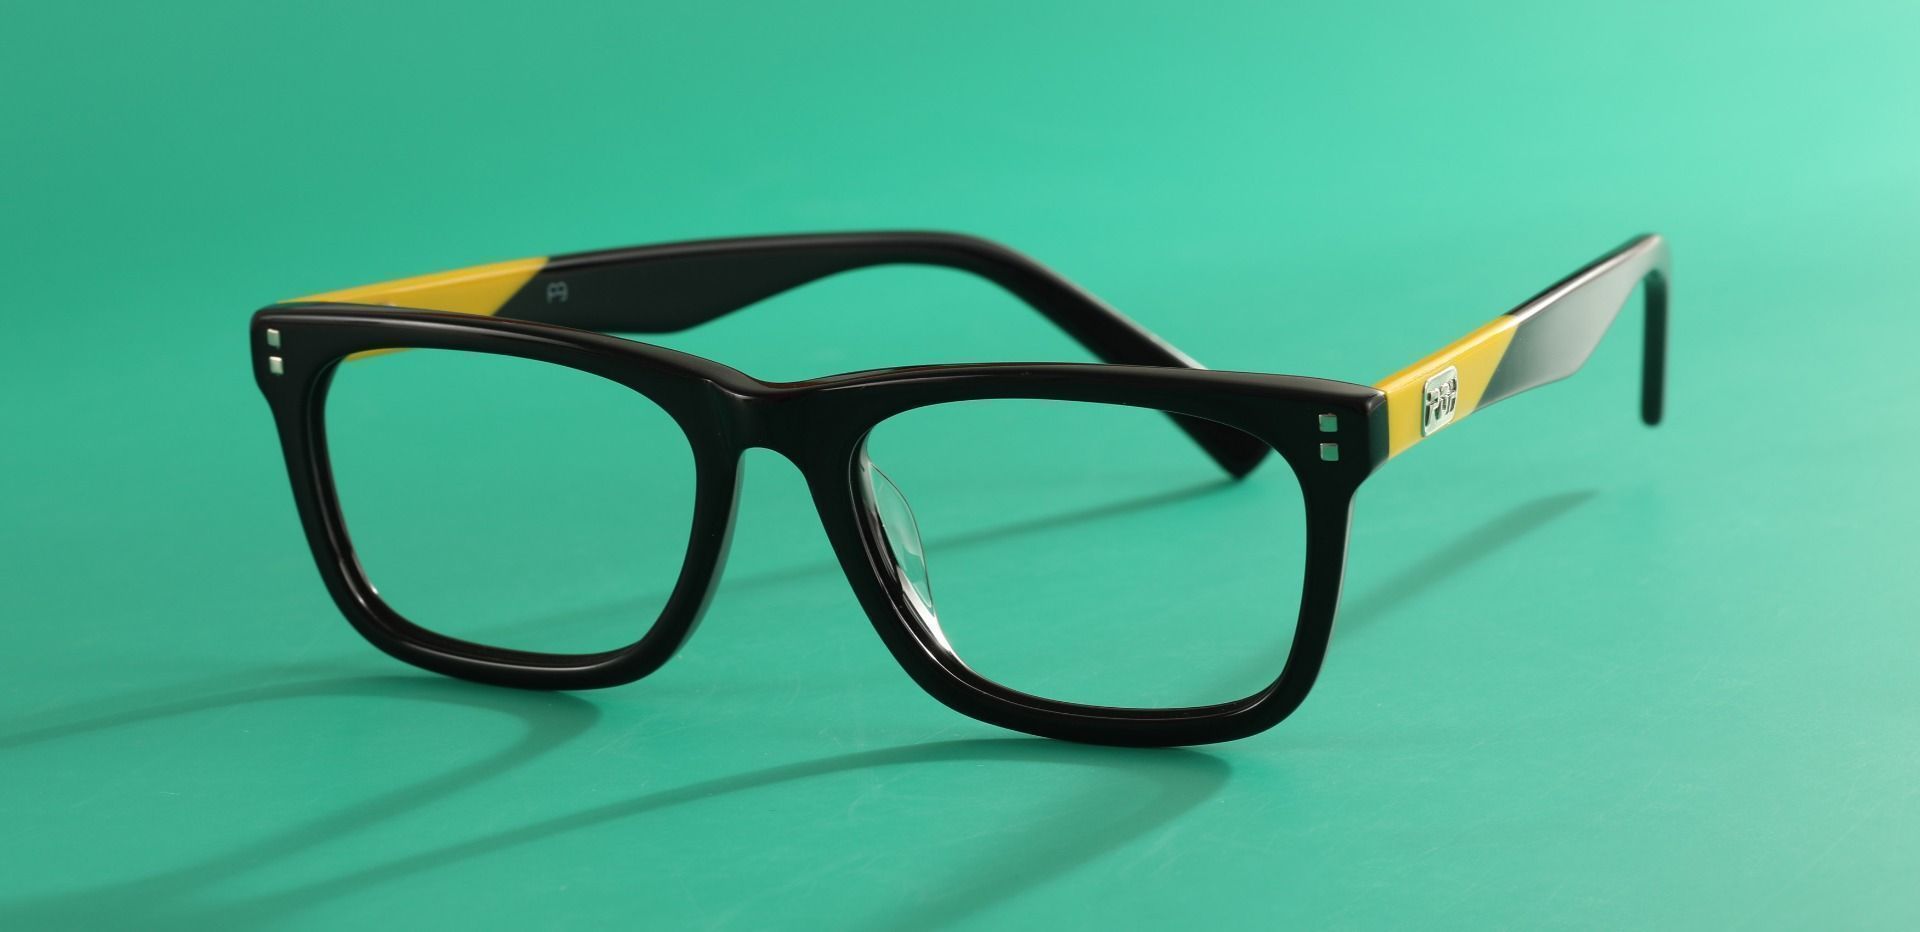 Blitz Rectangle Prescription Glasses - The Frame Is Black And Yellow